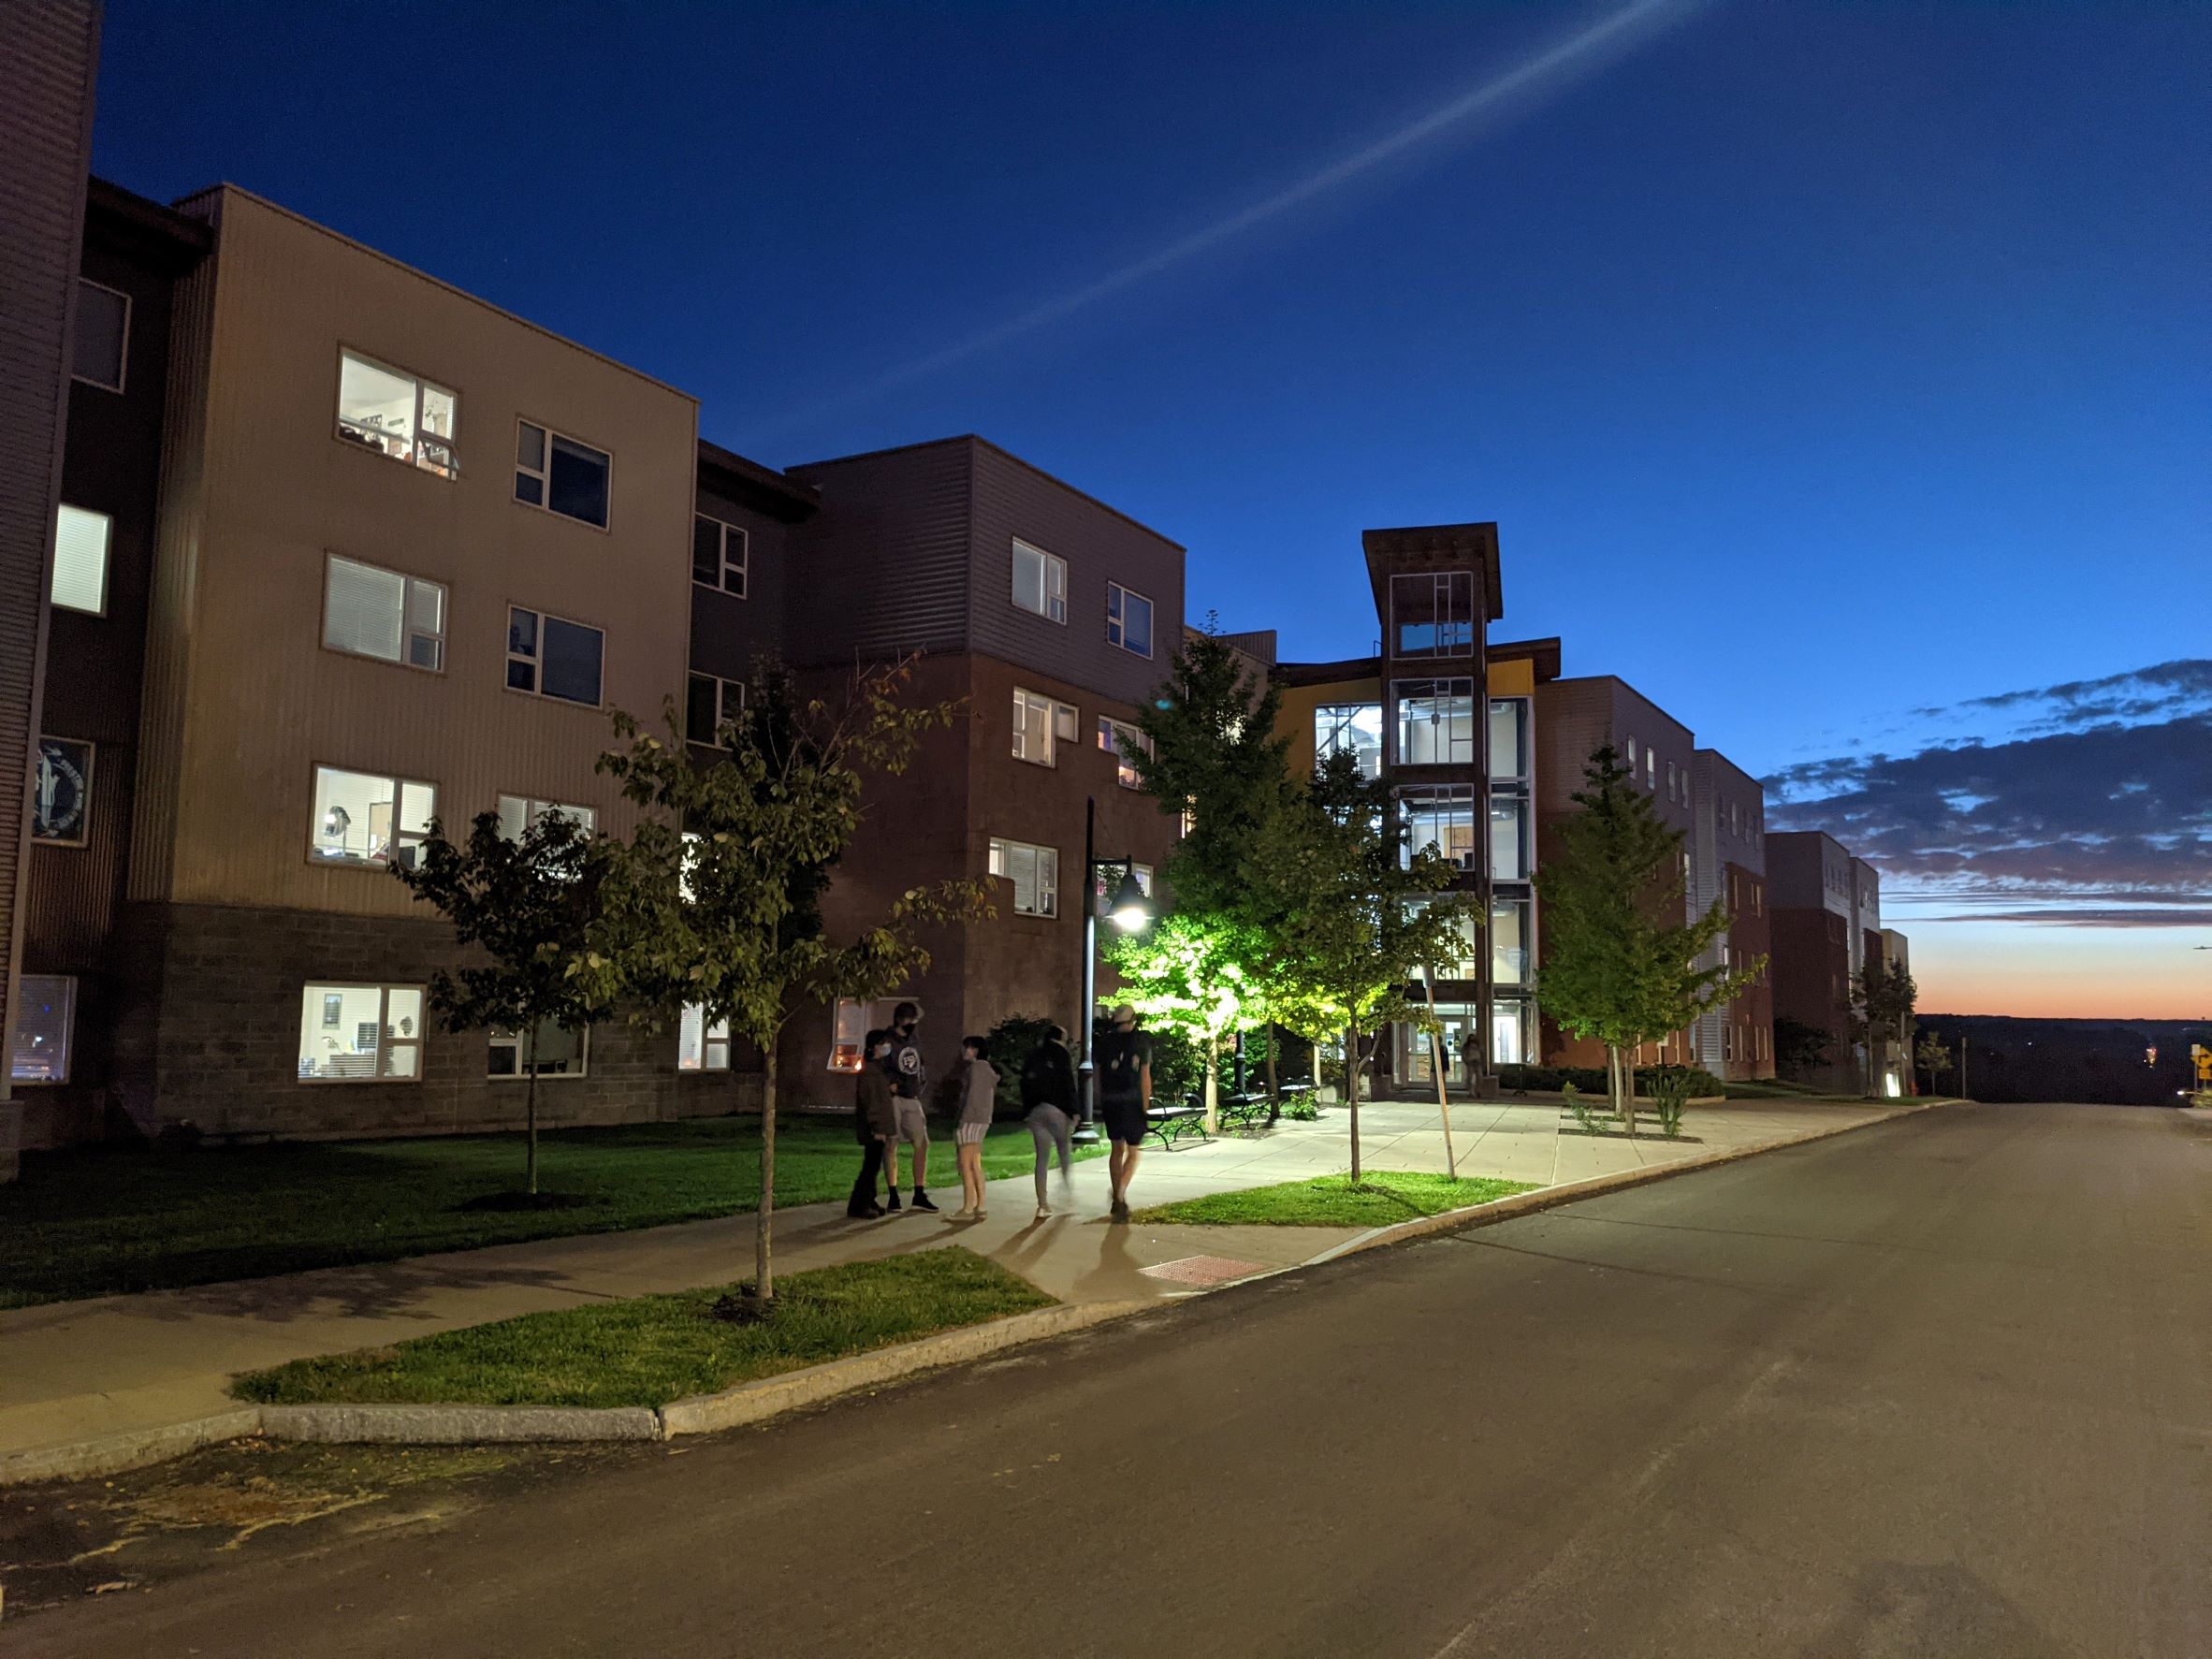 Long discontinues student housing building with large wooden ranger tower lit up at night with sunset in background, appears as a row of many rowhouses